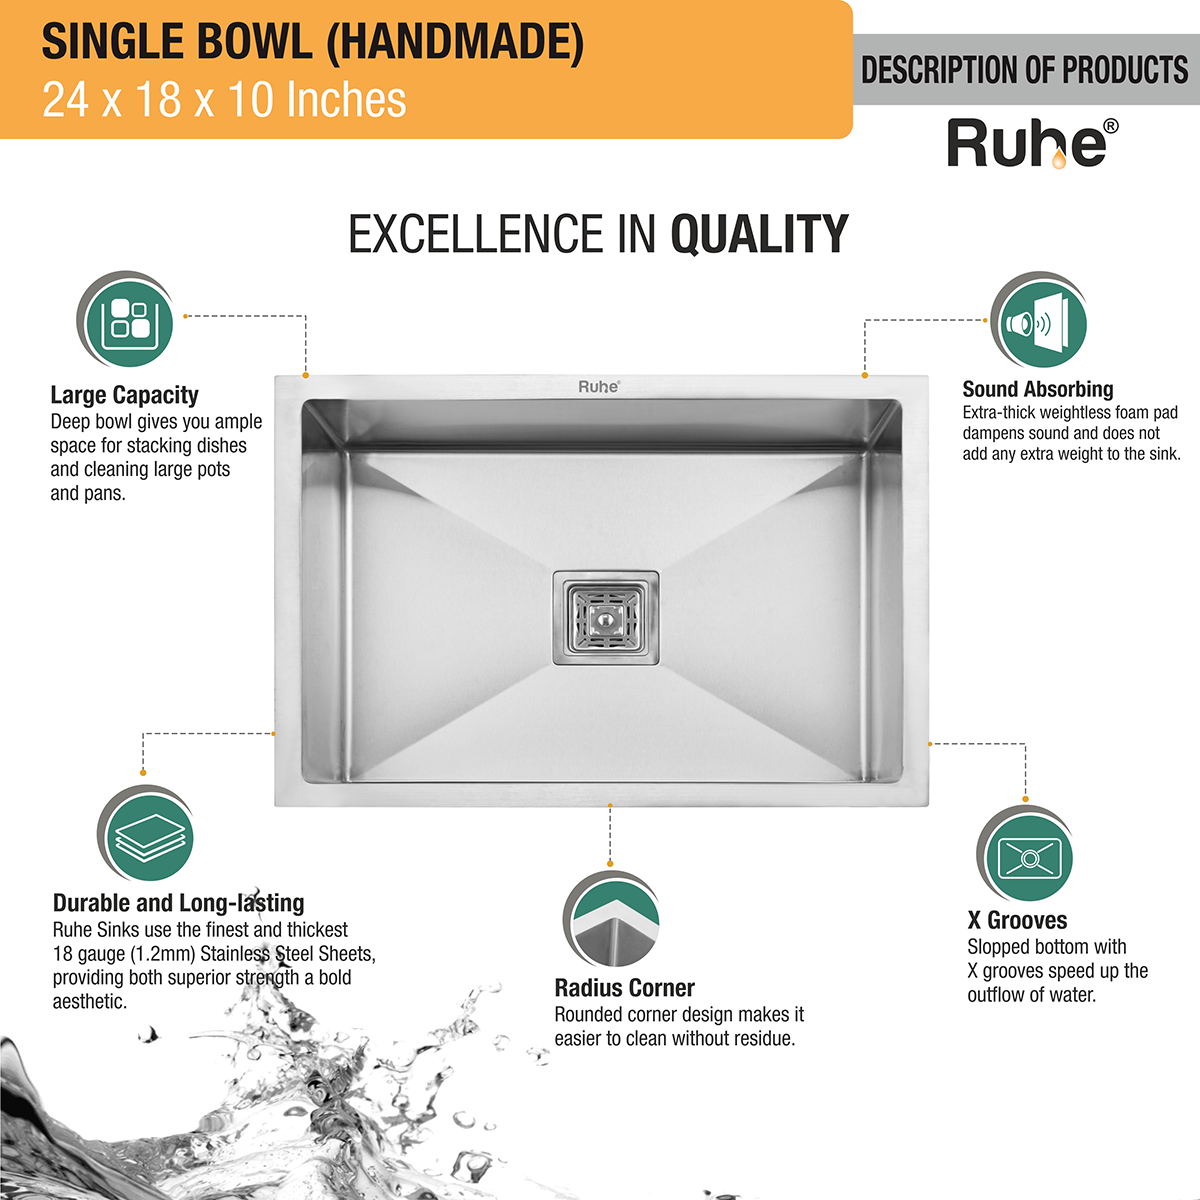 Handmade Single Bowl Premium Kitchen Sink (24 x 18 x 10 Inches) description of products